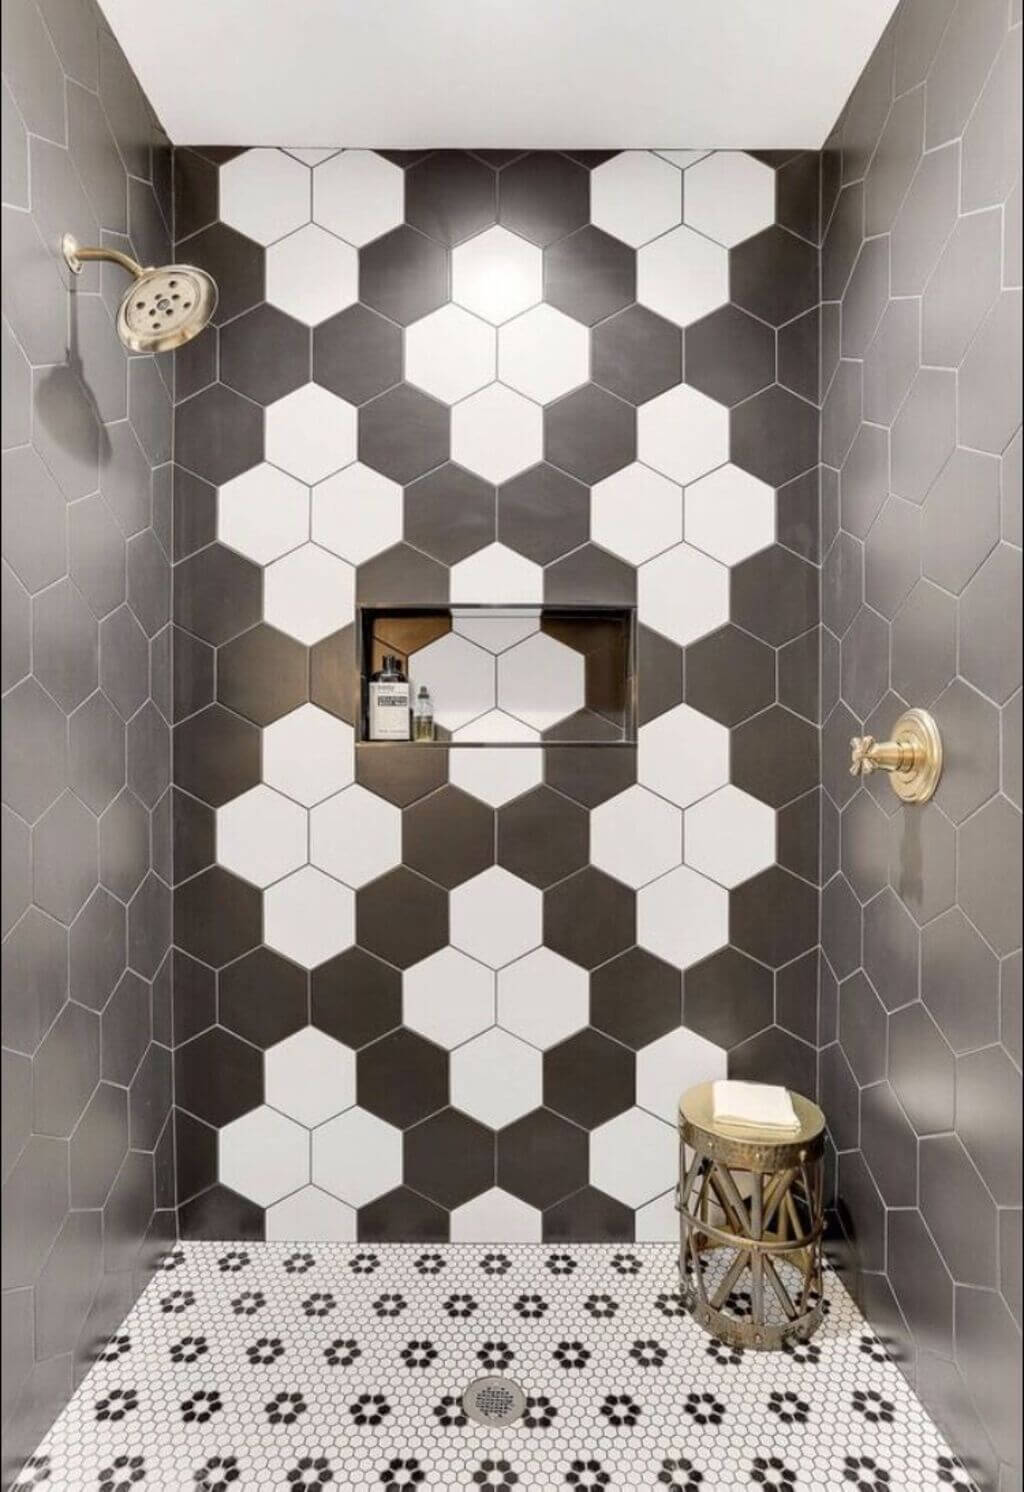 Achieve a Structured Look with Honeycomb Tiles